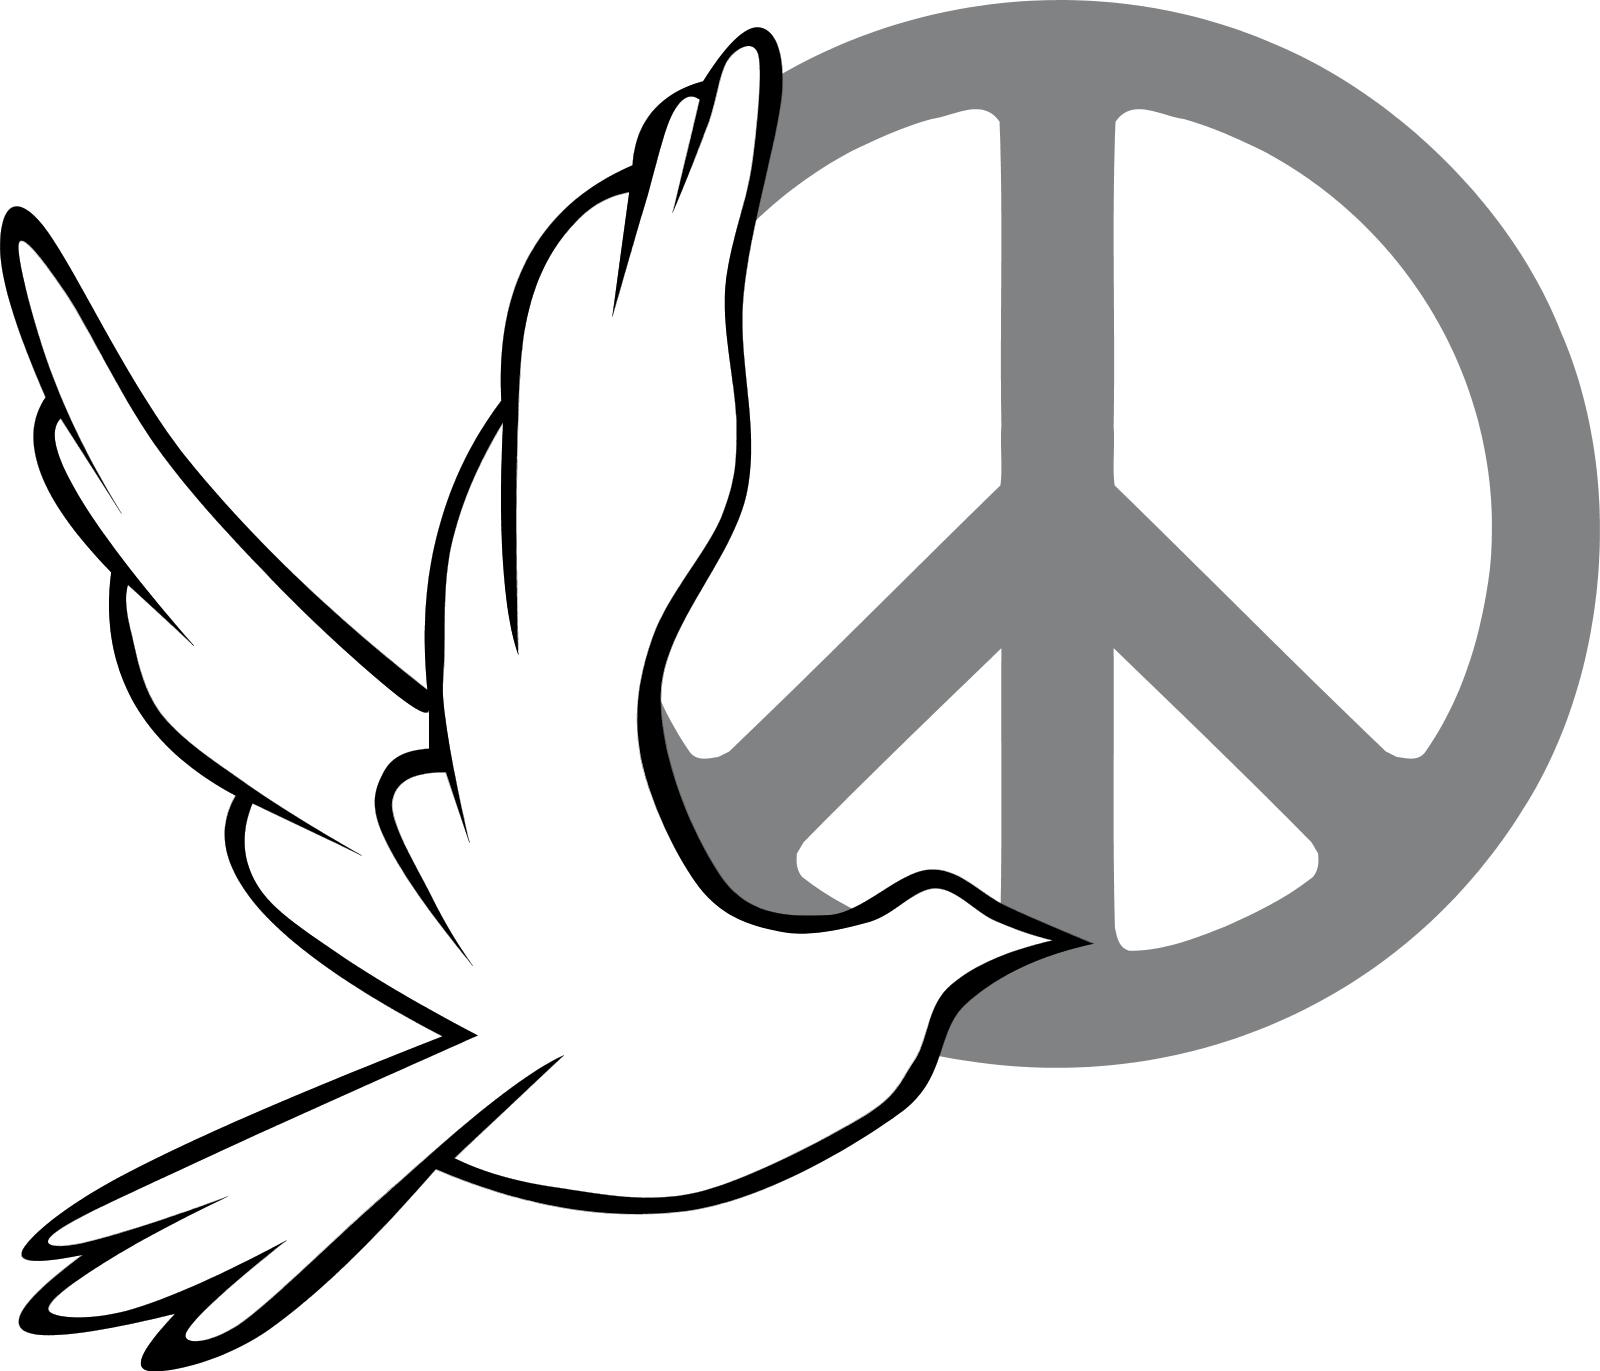 dove-peace-14 - Green Party of Delaware